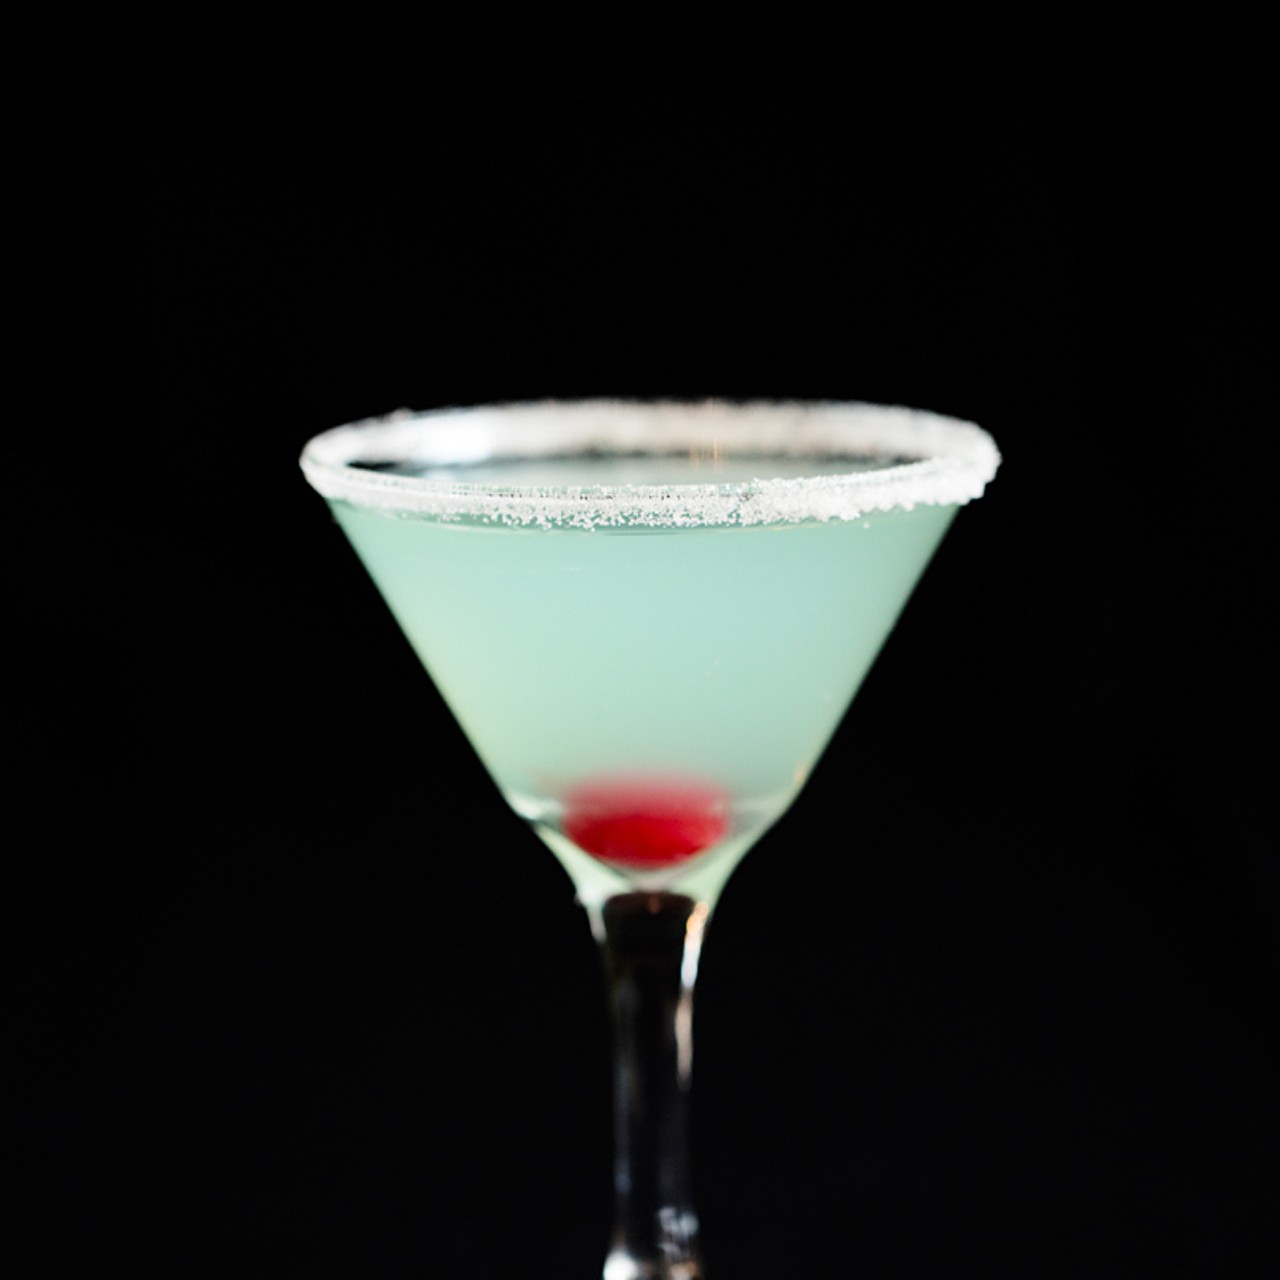 The Blue Illusion: Absolut Mandrin Vodka, Hpnotiq and sweet & sour mix, served in a glass with a sugared rim.